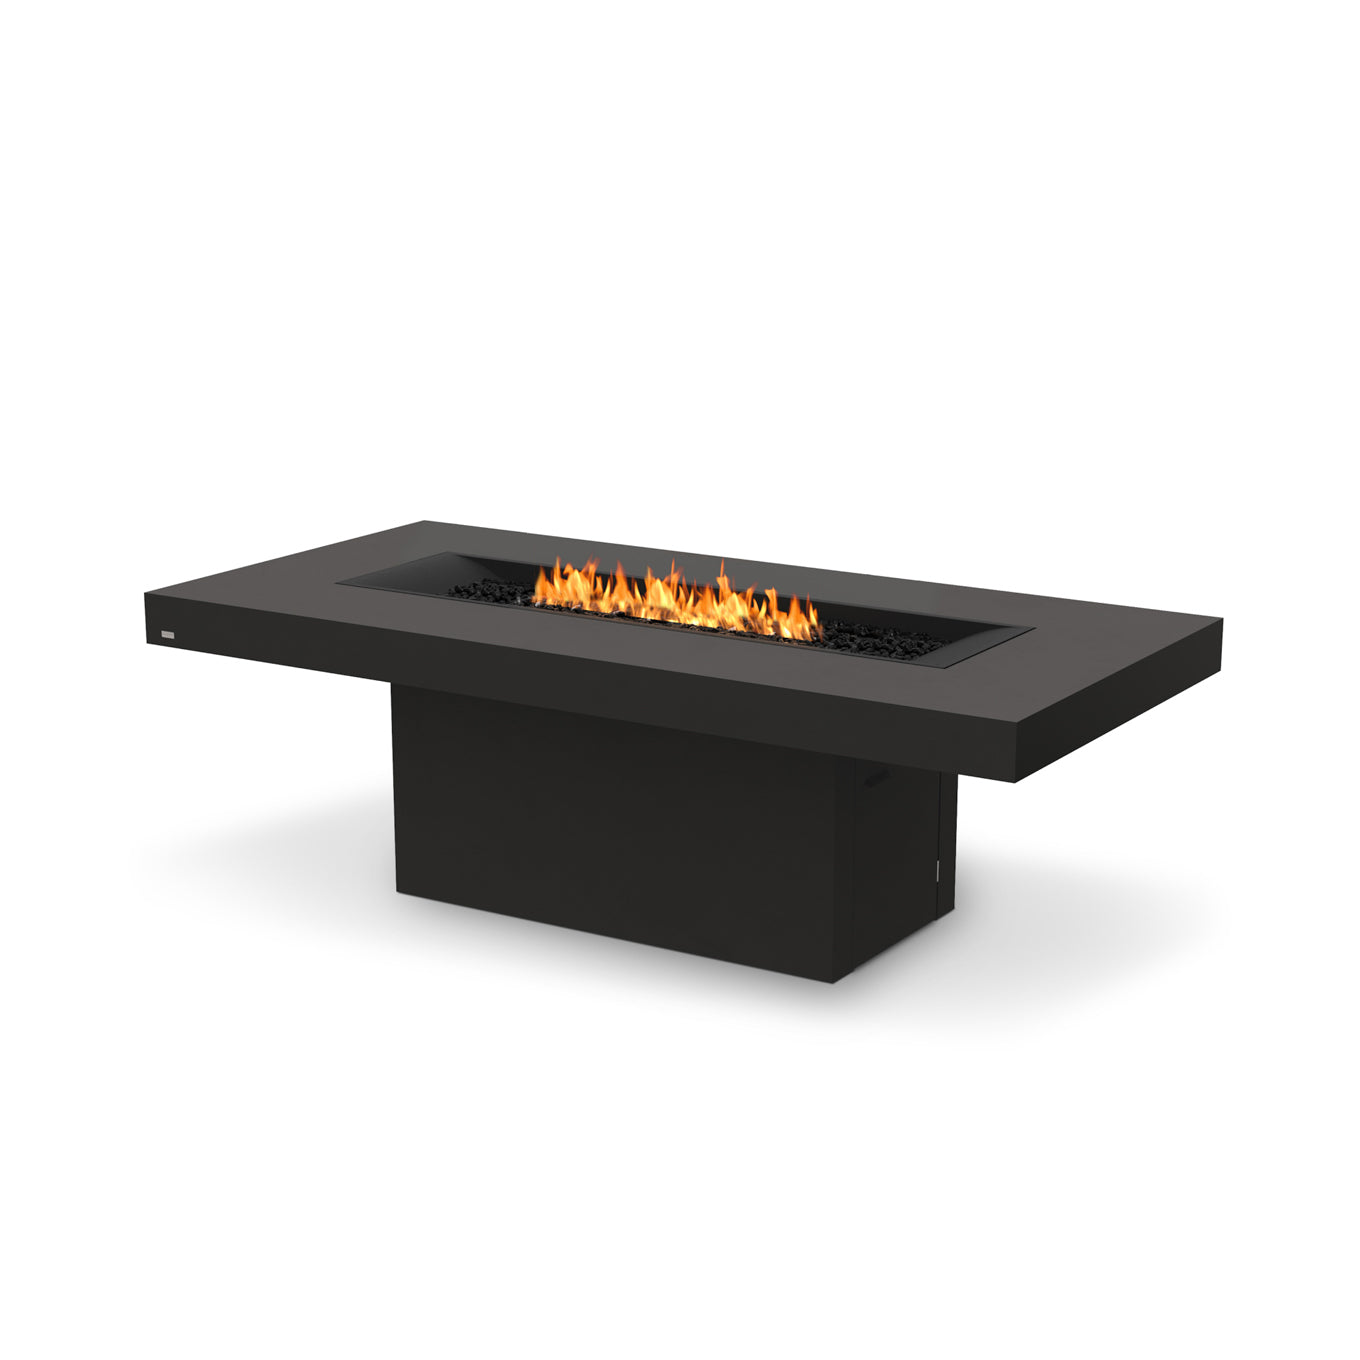 GIN 90 (DINING) FIRE PIT TABLE - NATURAL GAS / LIQUID PROPANE